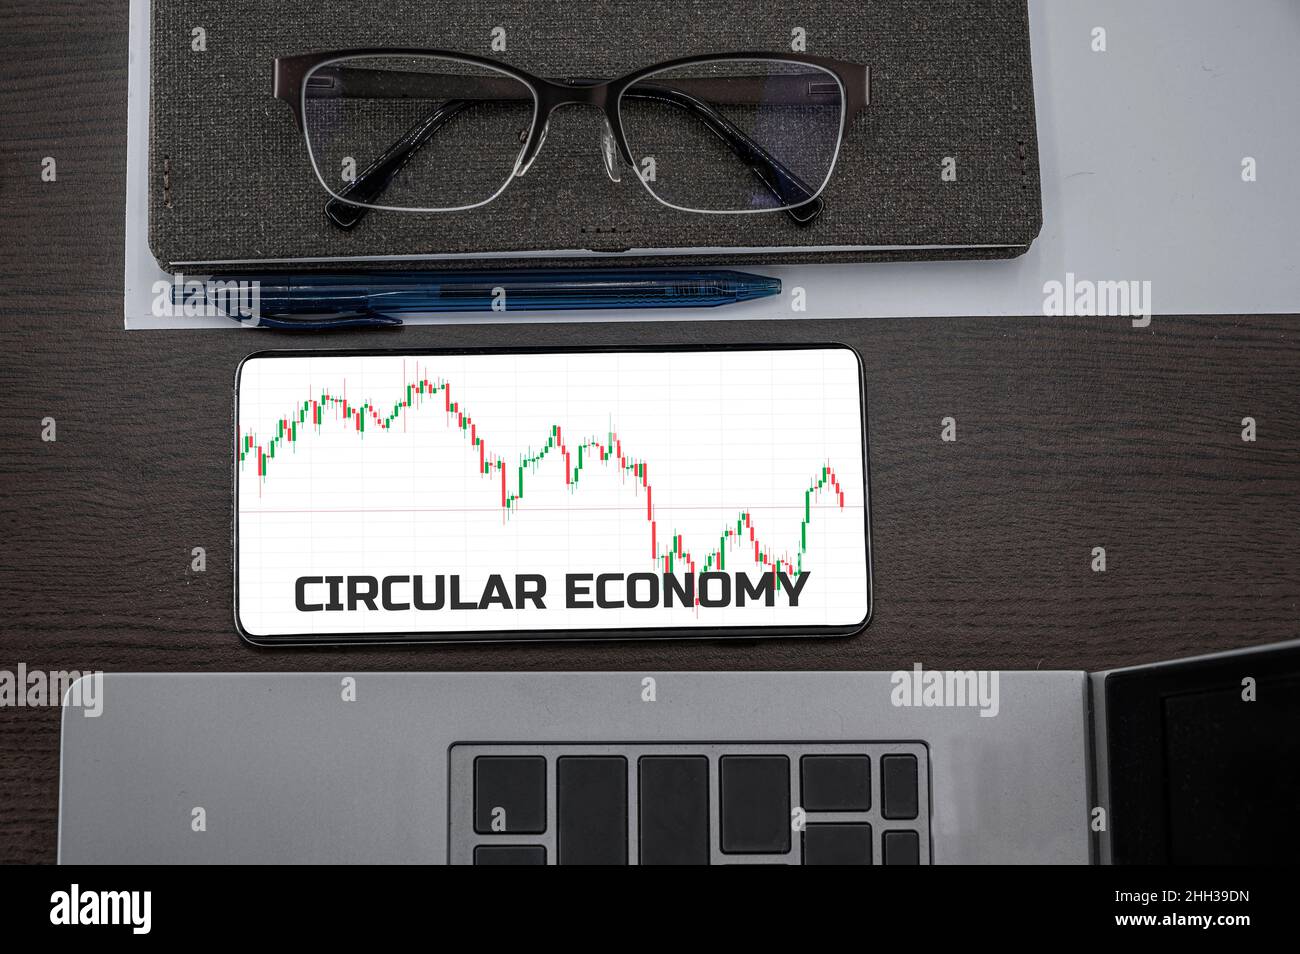 Circular economy concept. Top view of stocks price candlestick chart in phone on table near laptop, notepad and glasses with inscription circular econ Stock Photo